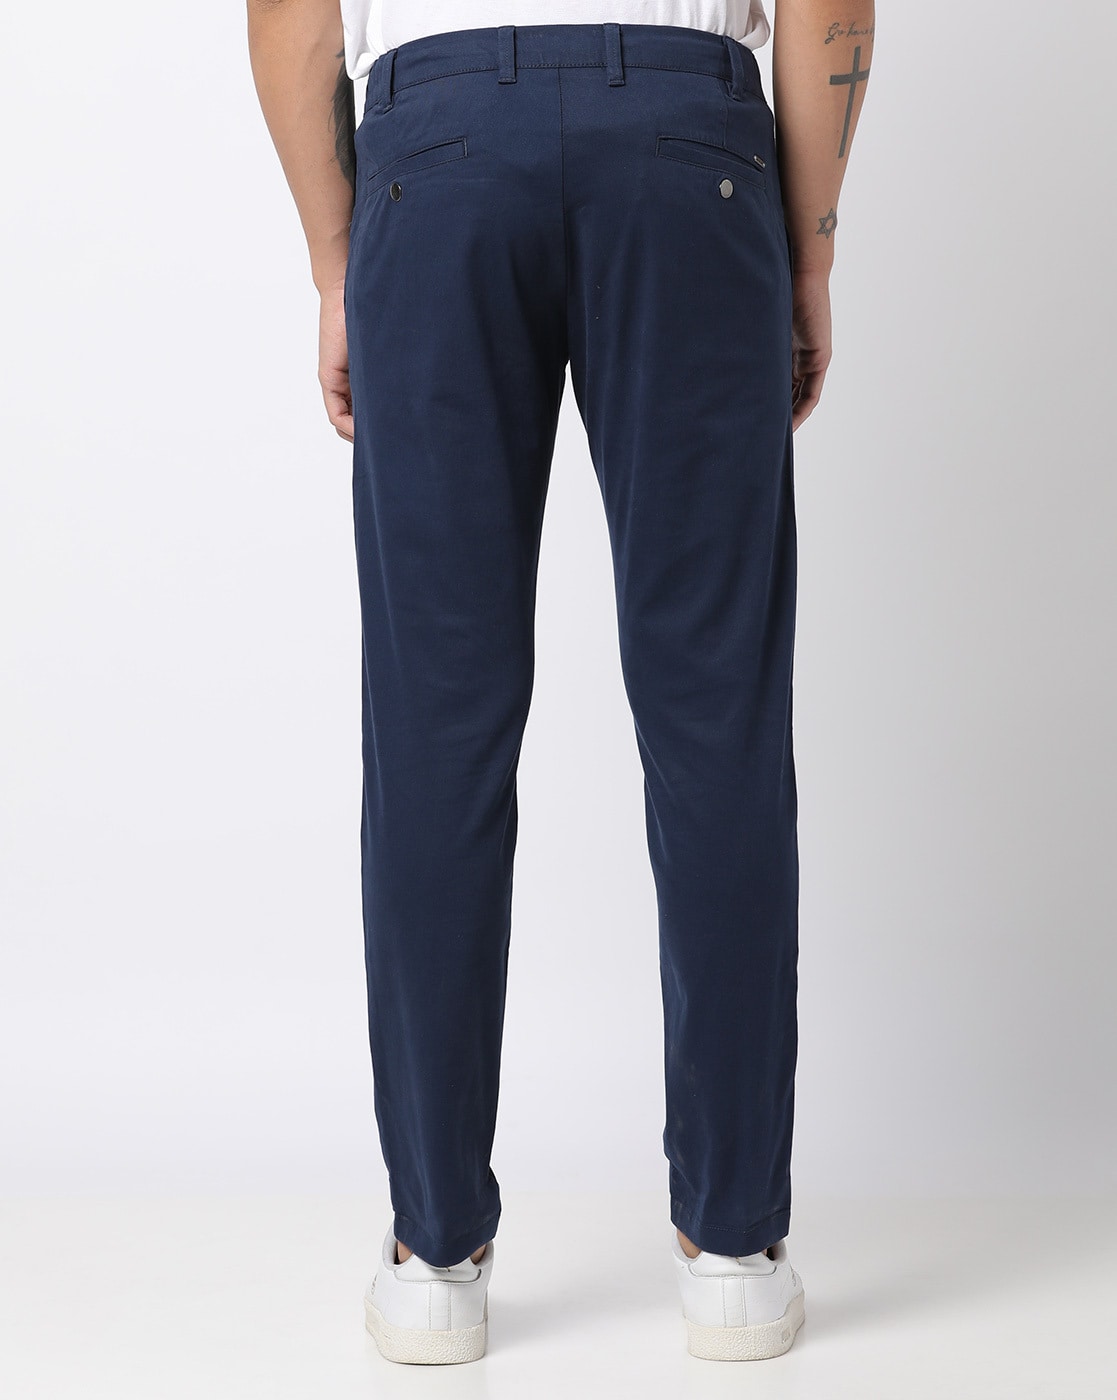 Buy Navy Cotton Slim Pants (Pants) for INR499.50